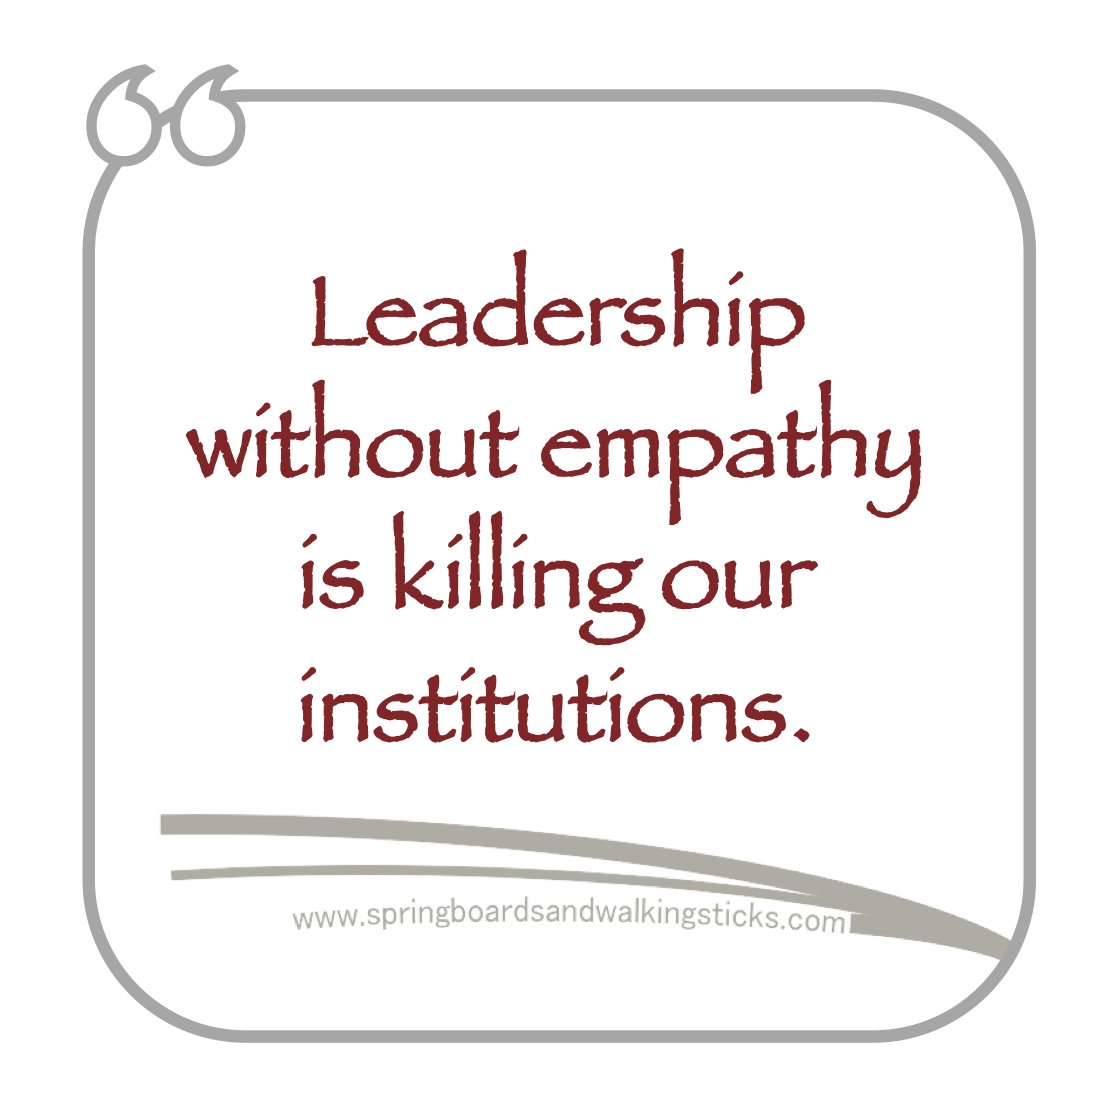 Psychopaths and leadership and empathy